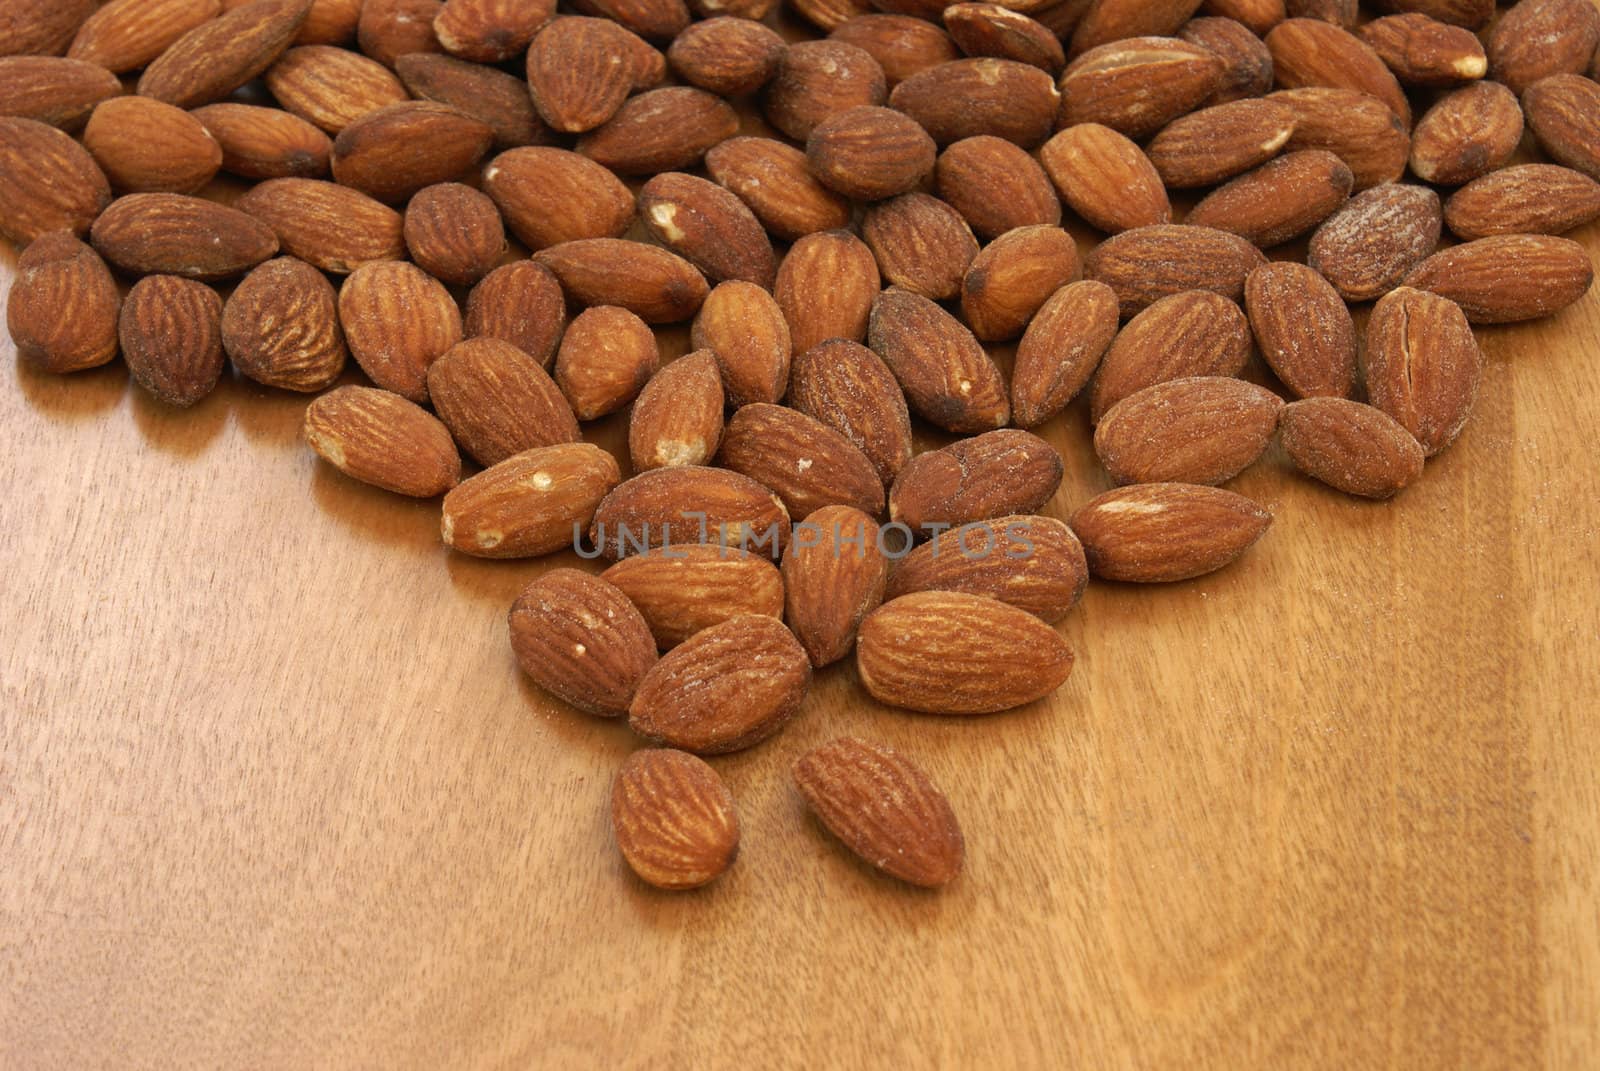 A pile of almonds on a wood background.